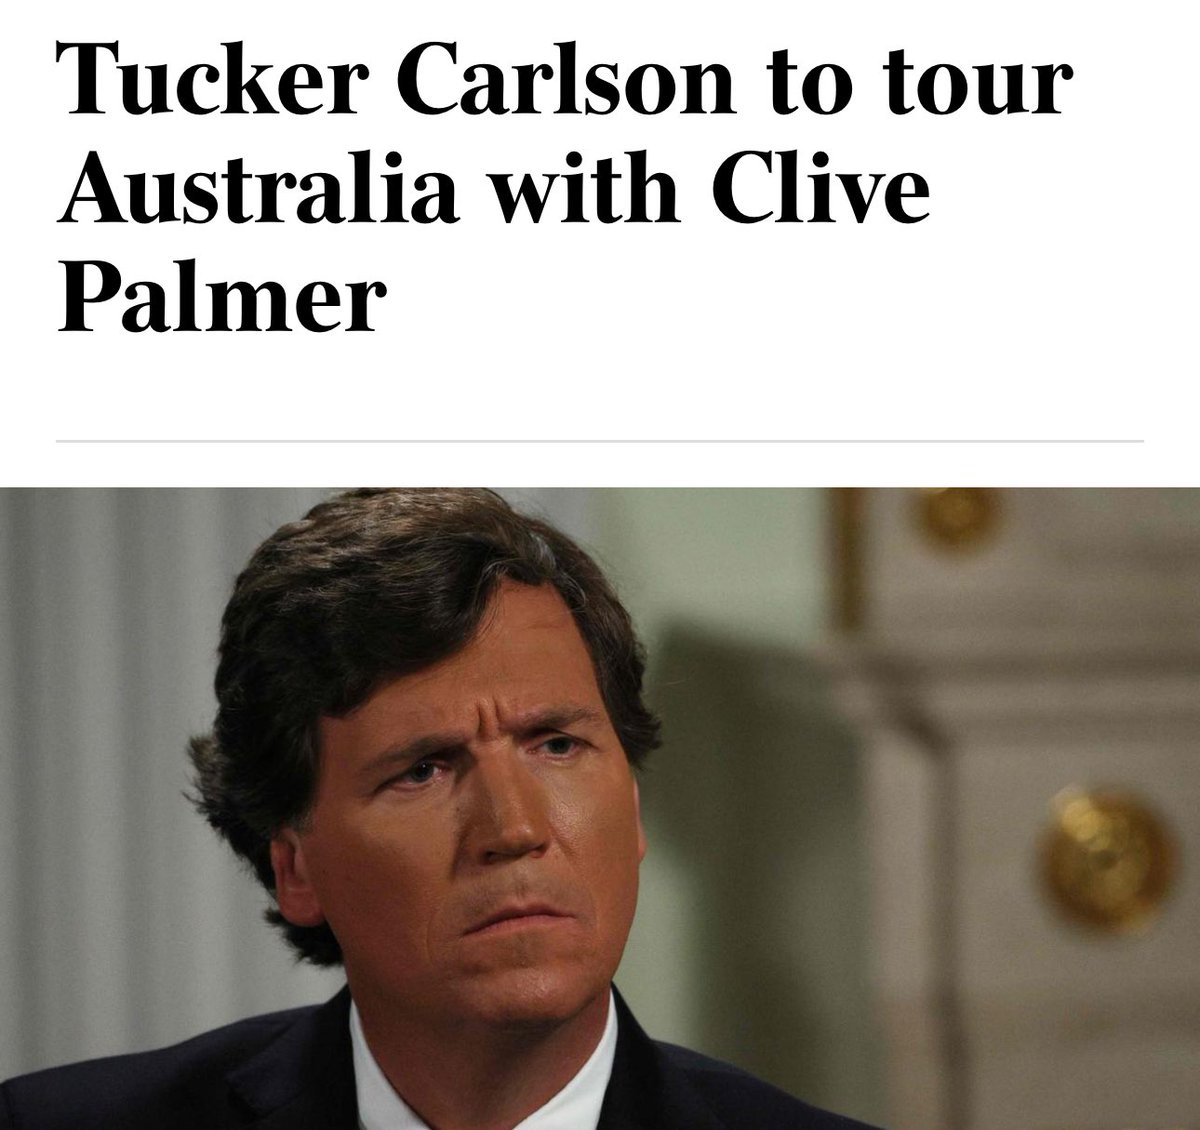 Imagine paying $257 to see a US man fired by Fox News and a billionaire who is literally suing Australia for $300 billion talk about how the “elite” are supposedly suppressing you